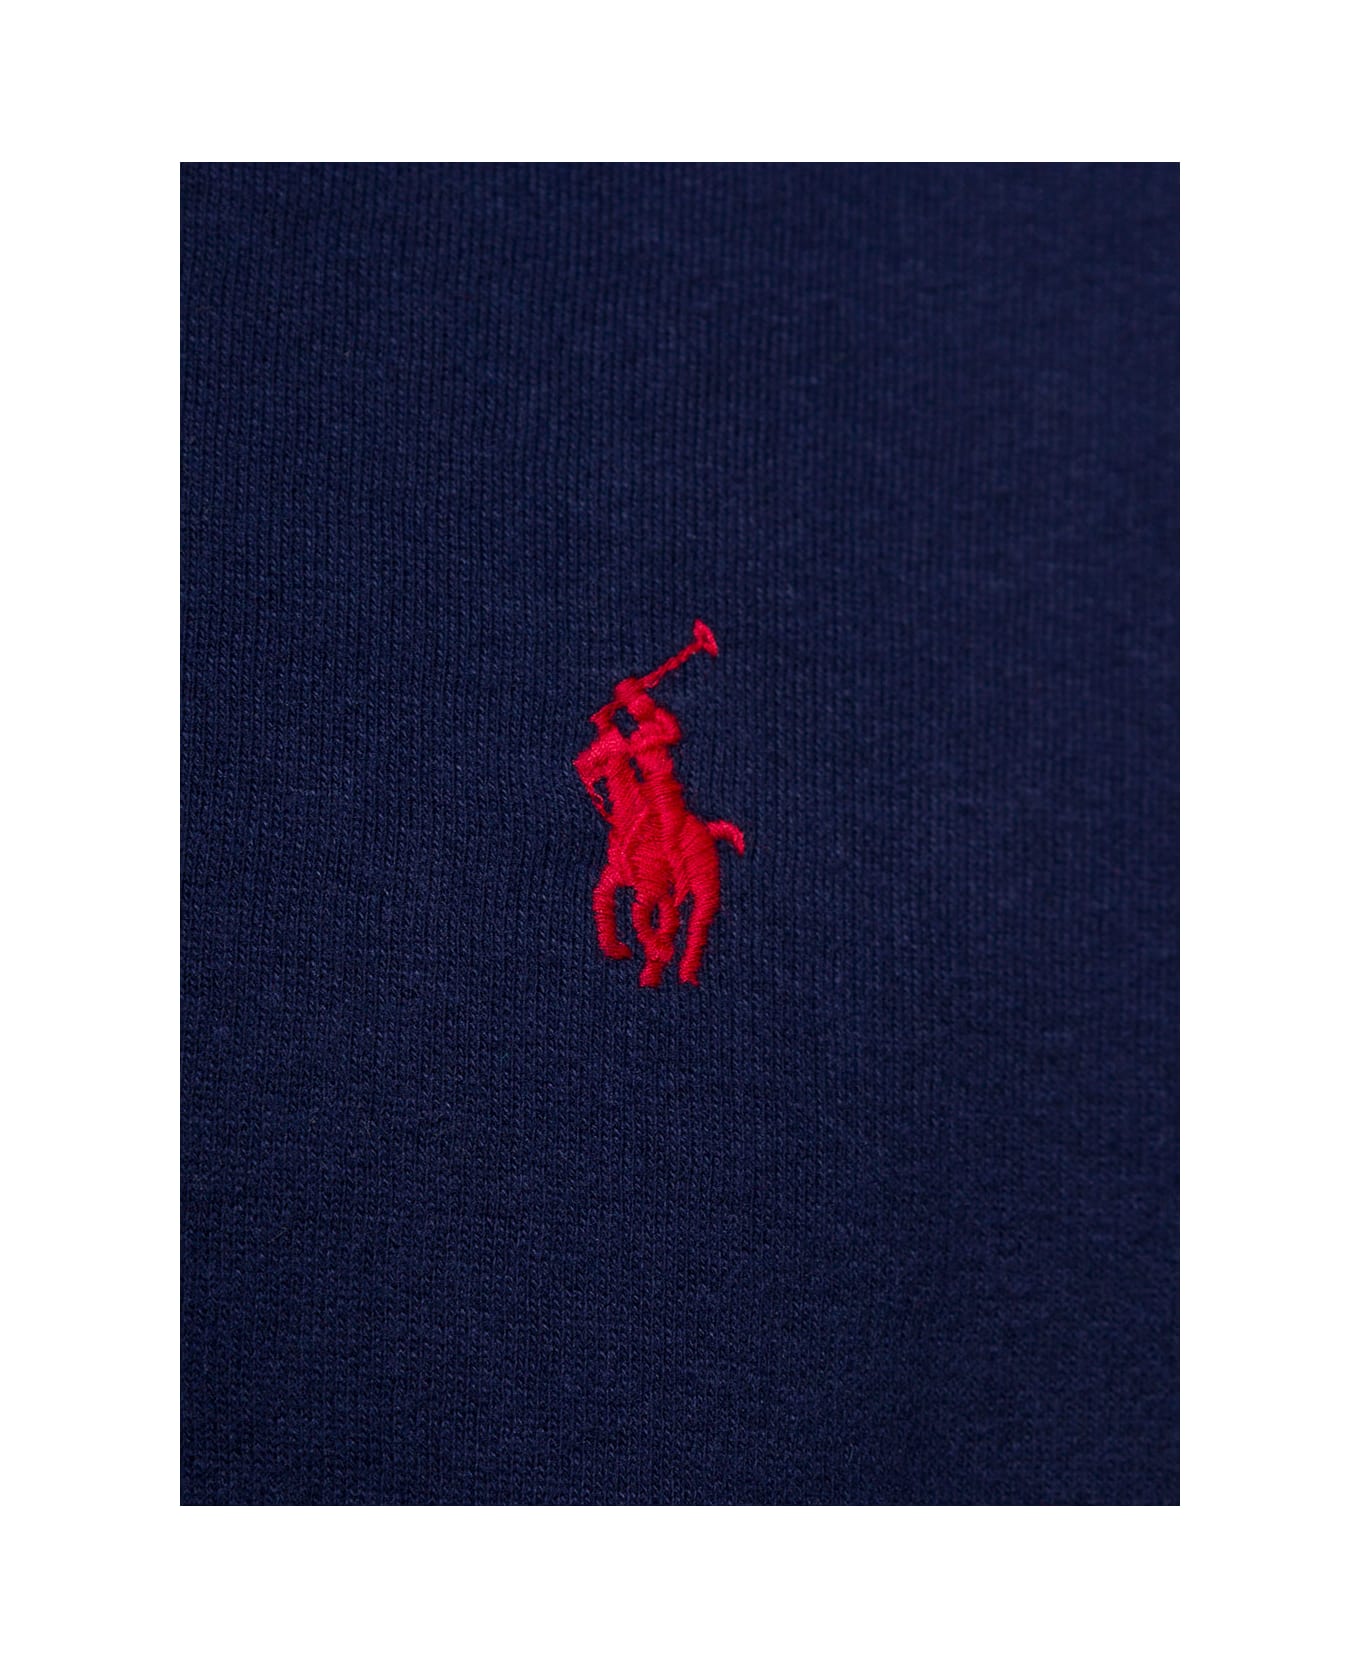 Polo Ralph Lauren Blue Hoodie With Drawstring And Embroidered Logo In Cotton Man - Cruise navy